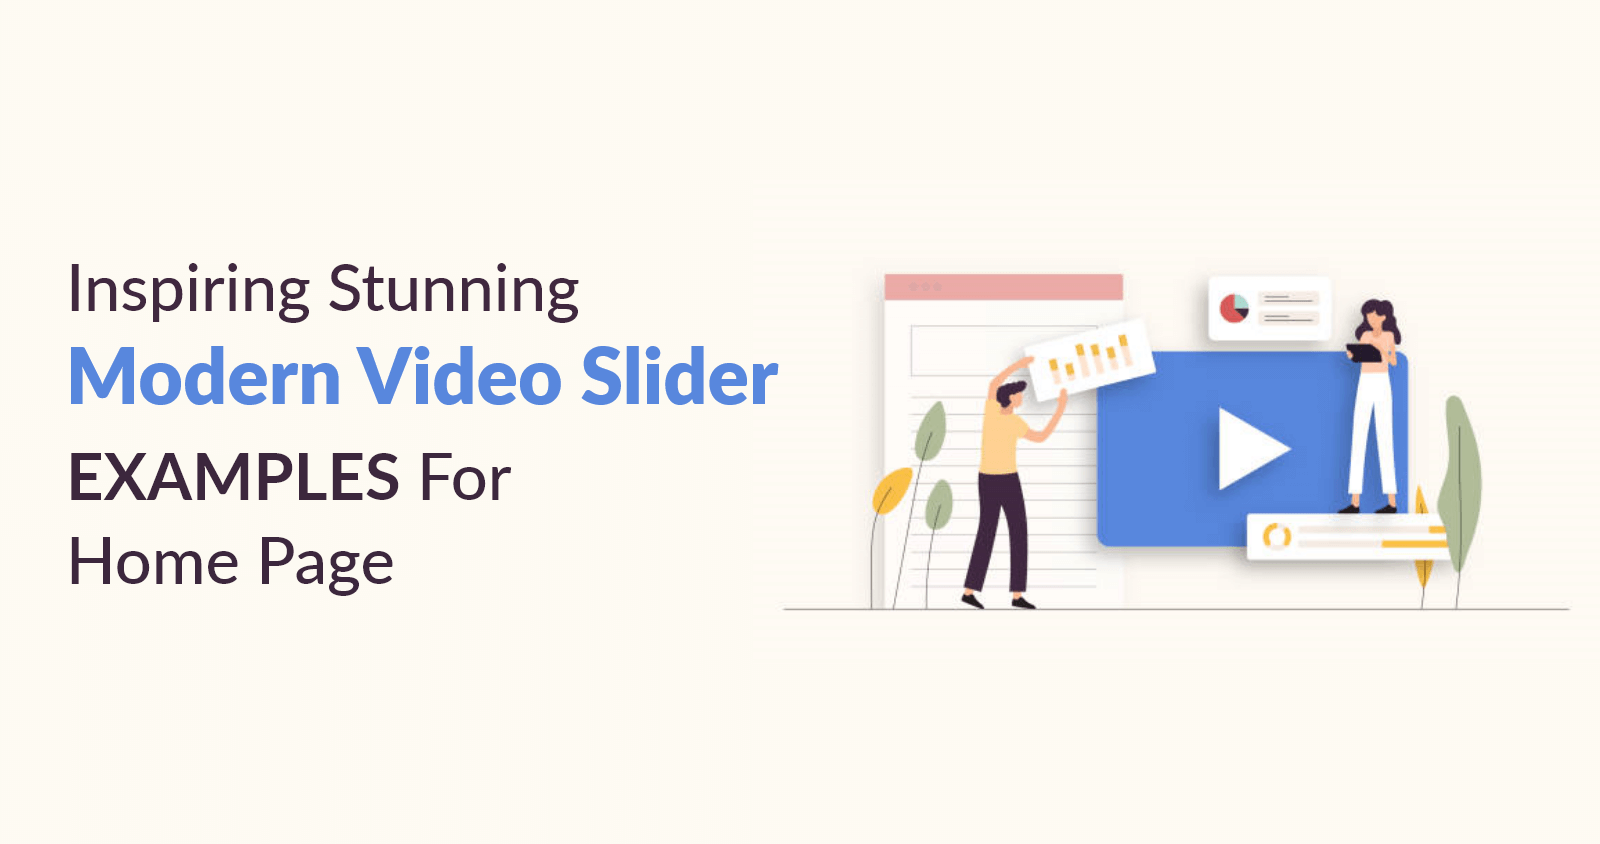 Inspiring Stunning Modern Video Slider Examples for Home Page